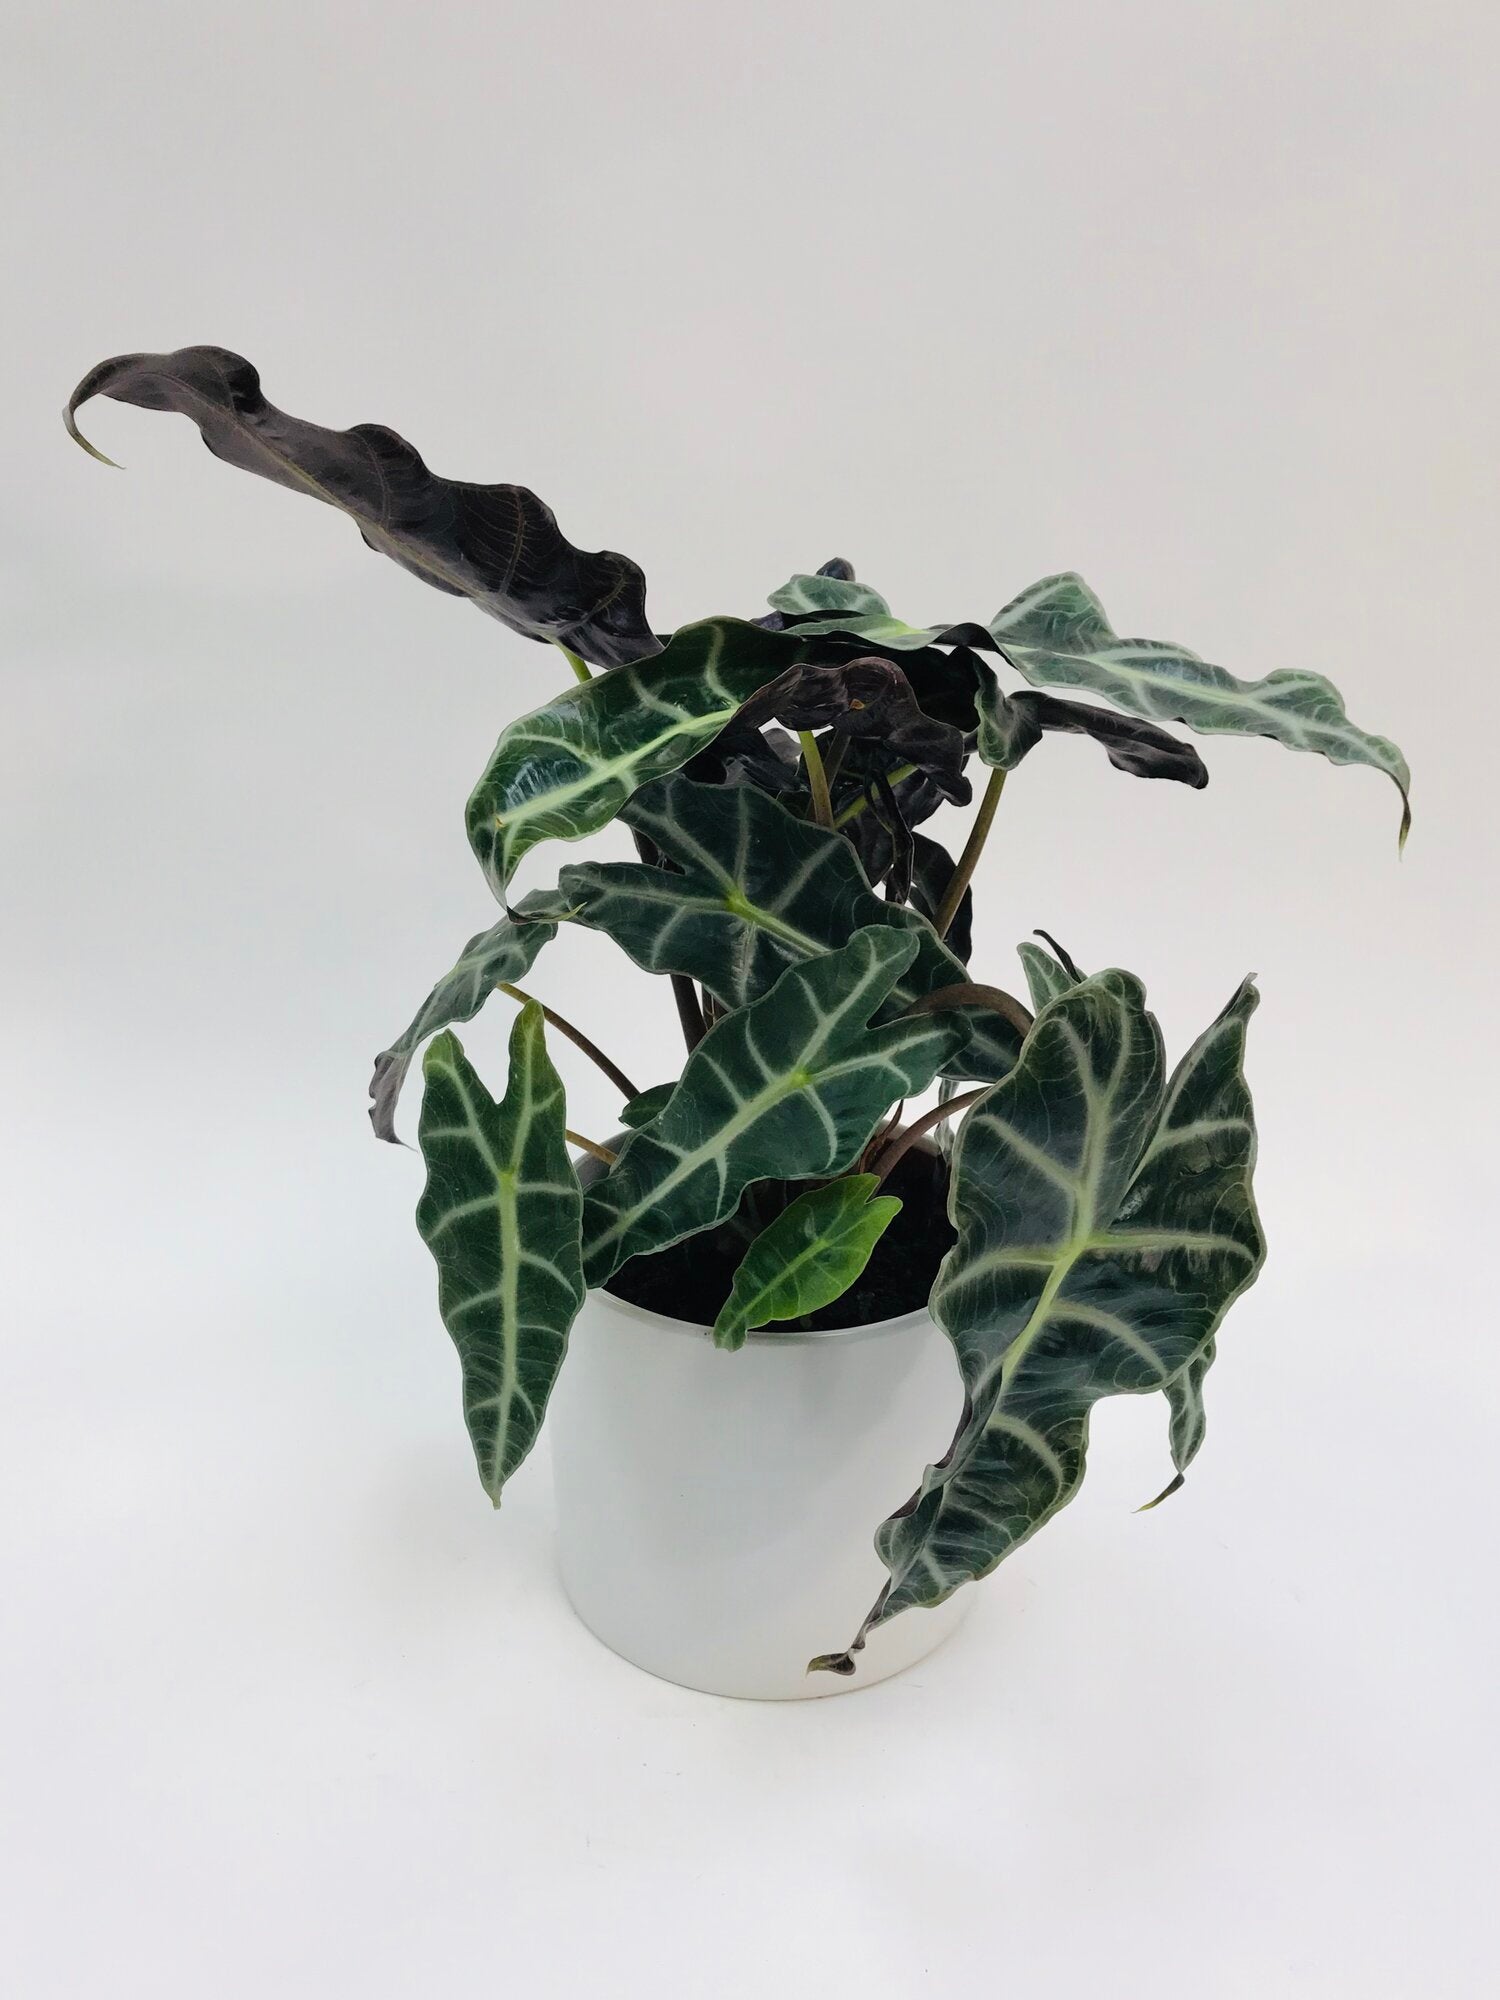 Alocasia African Mask 6"